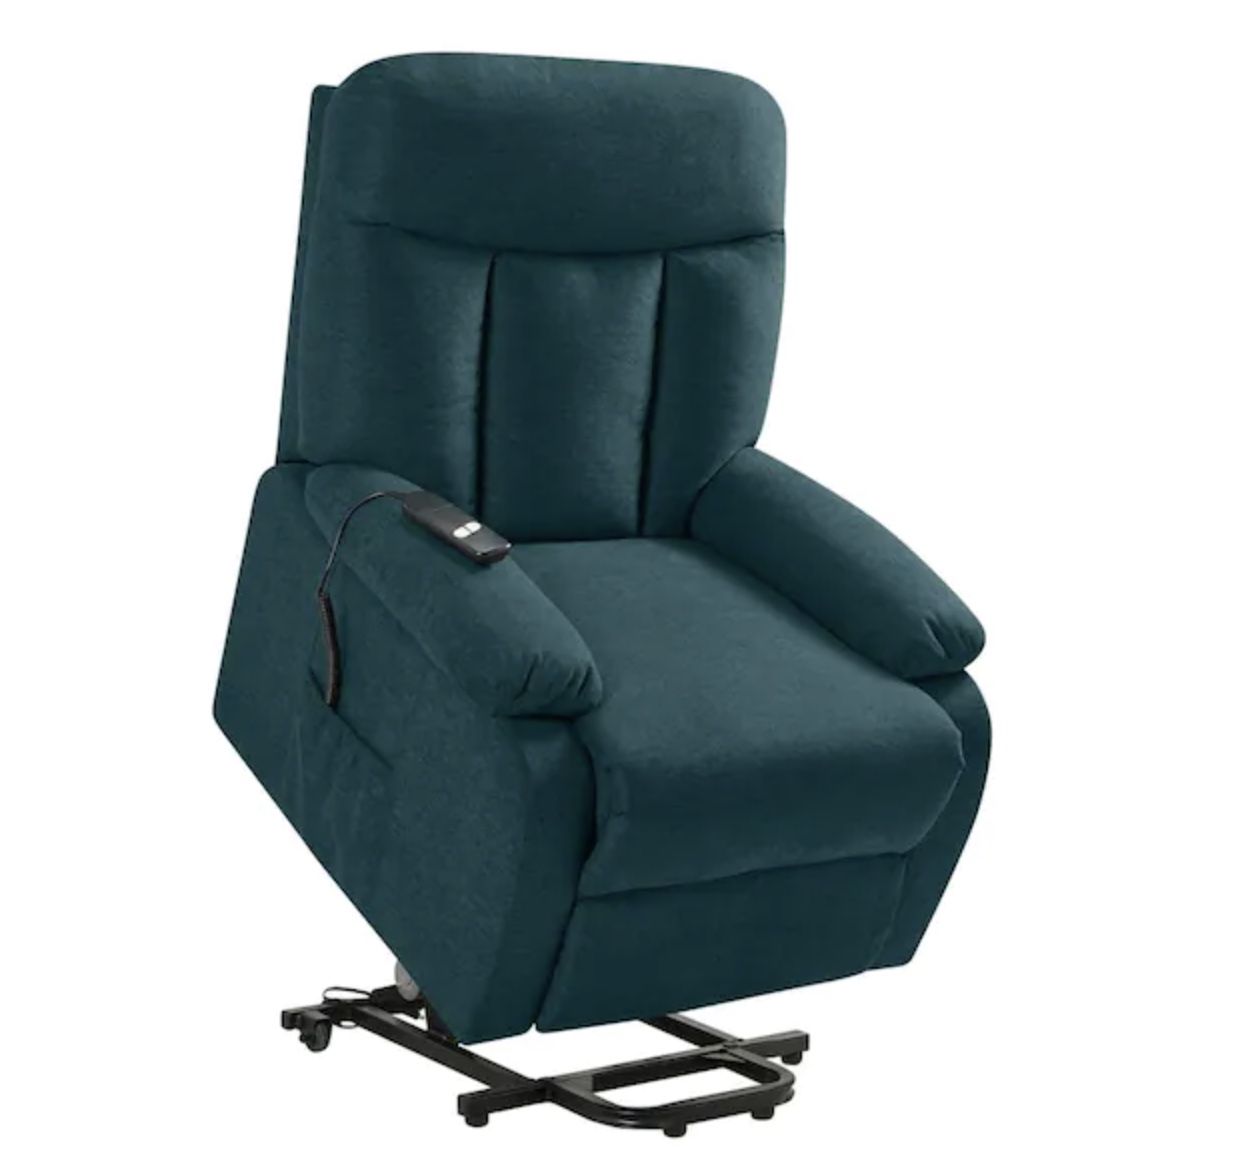 Power Lift Reclining Chair in Peacock Blue Plush Low-Pile Velour %60 OFF